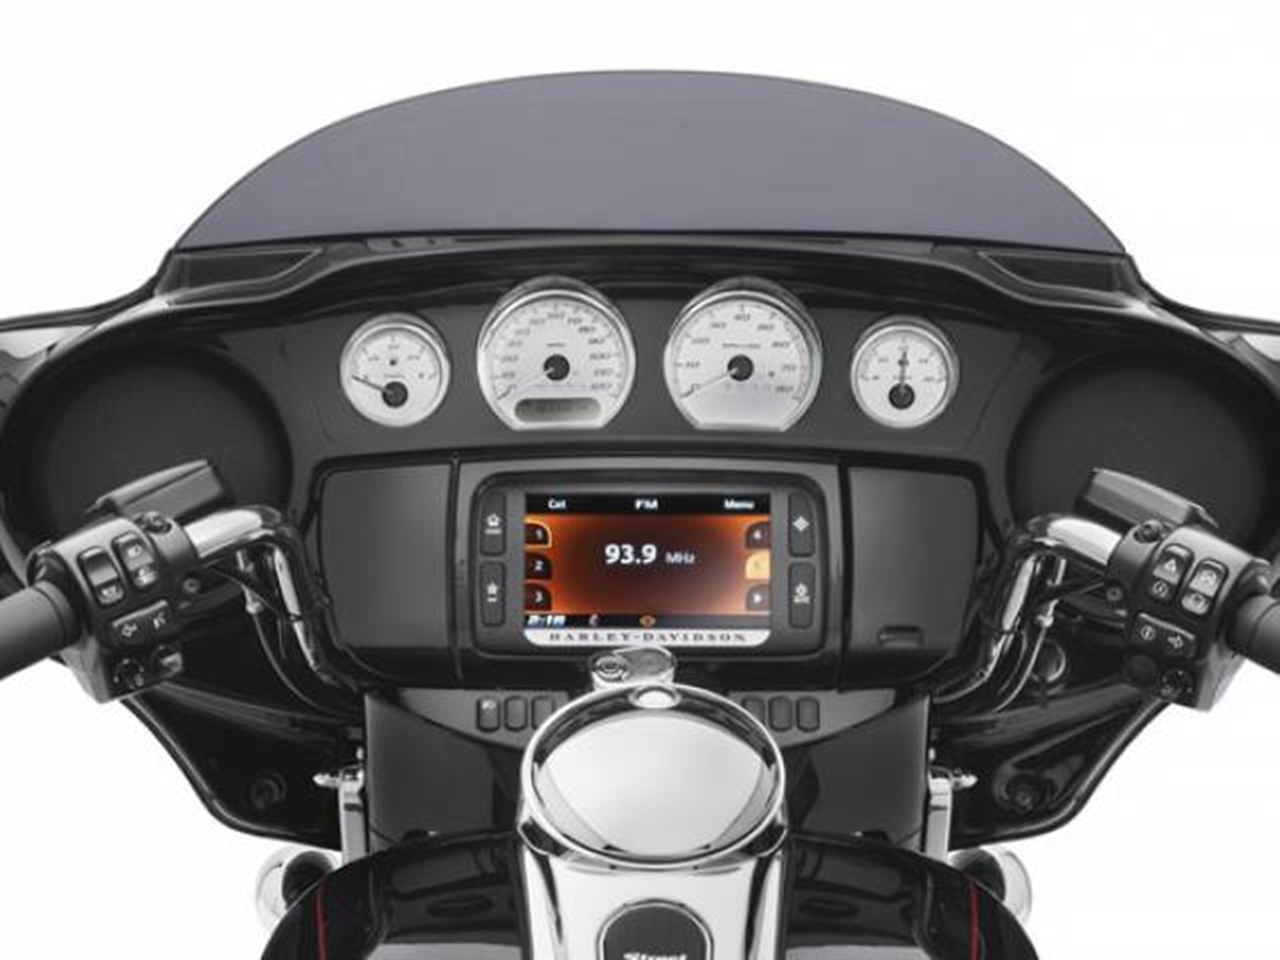 Harley Davidson Genuine Motor Accessories and Parts